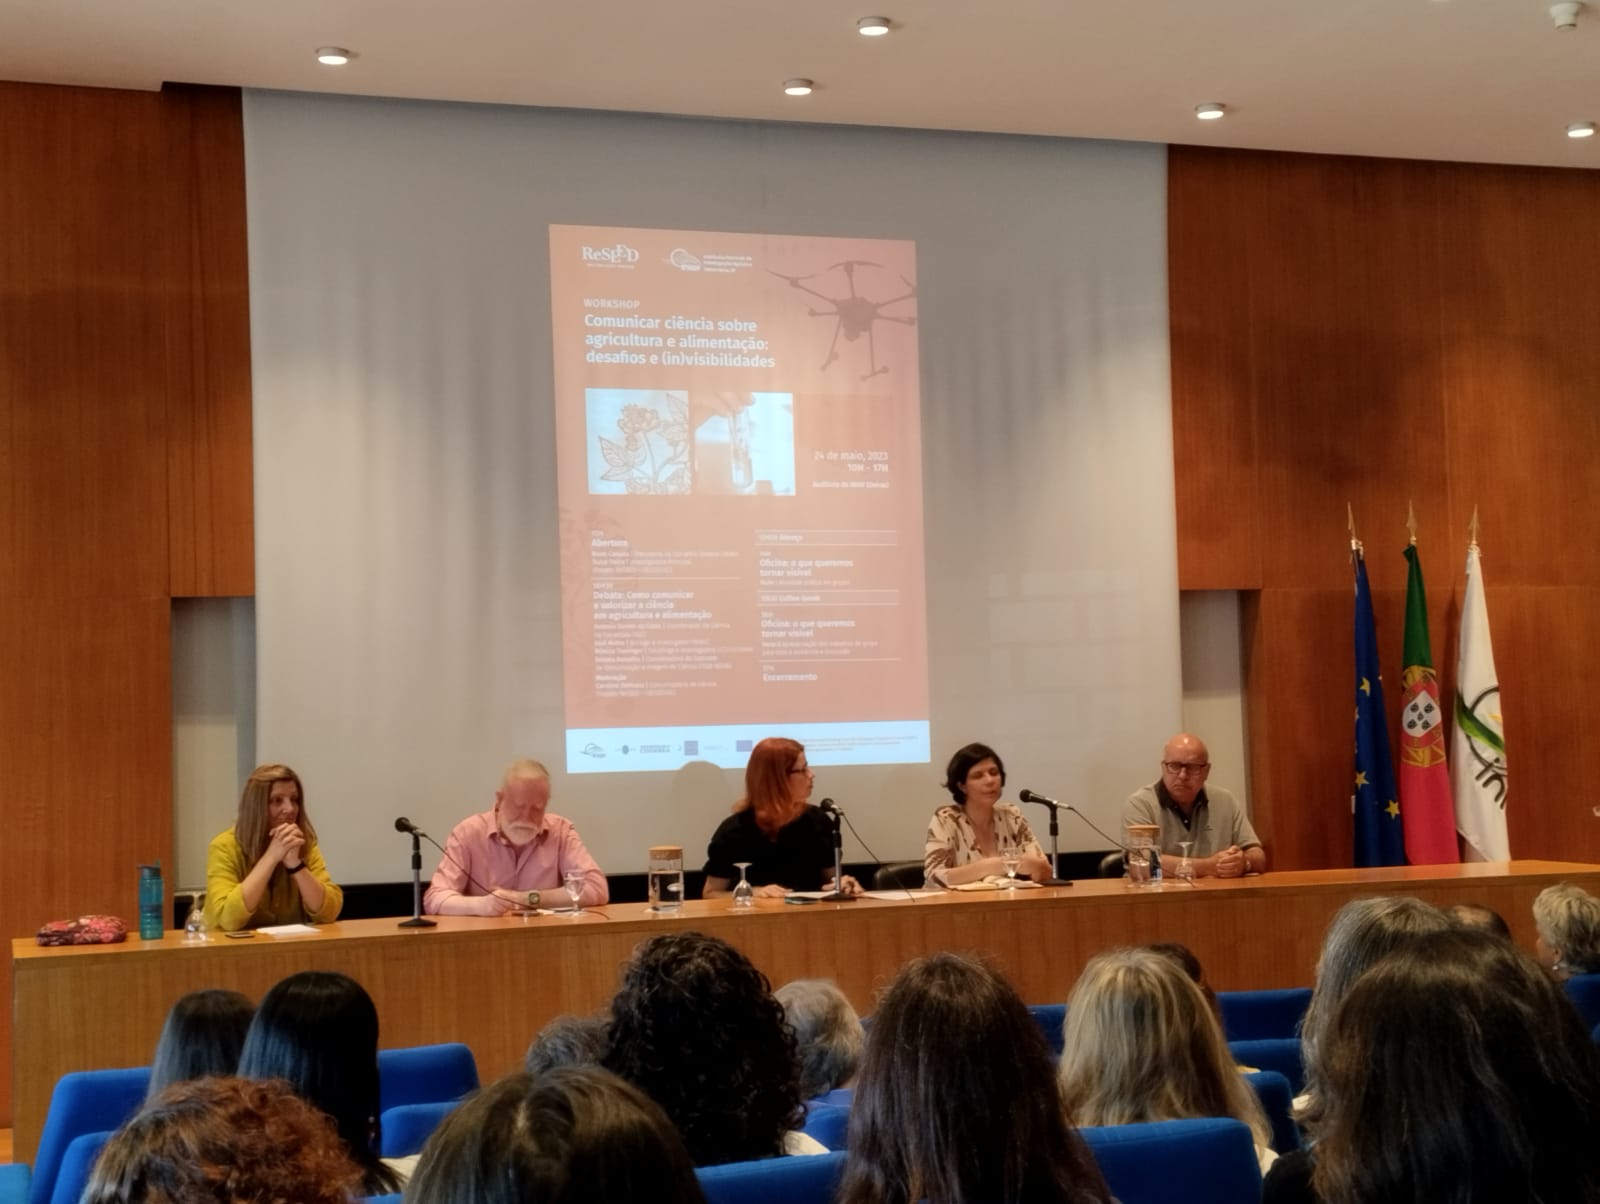 Debate table on stage: in the background, the projection of the workshop poster. From left to right, seated: Mónica Truninger, Antonio Gomes da Costa, Caroline Delmazo, Renata Ramalho and José Matos. You can also see part of the audience from the back, the auditorium chairs are blue.